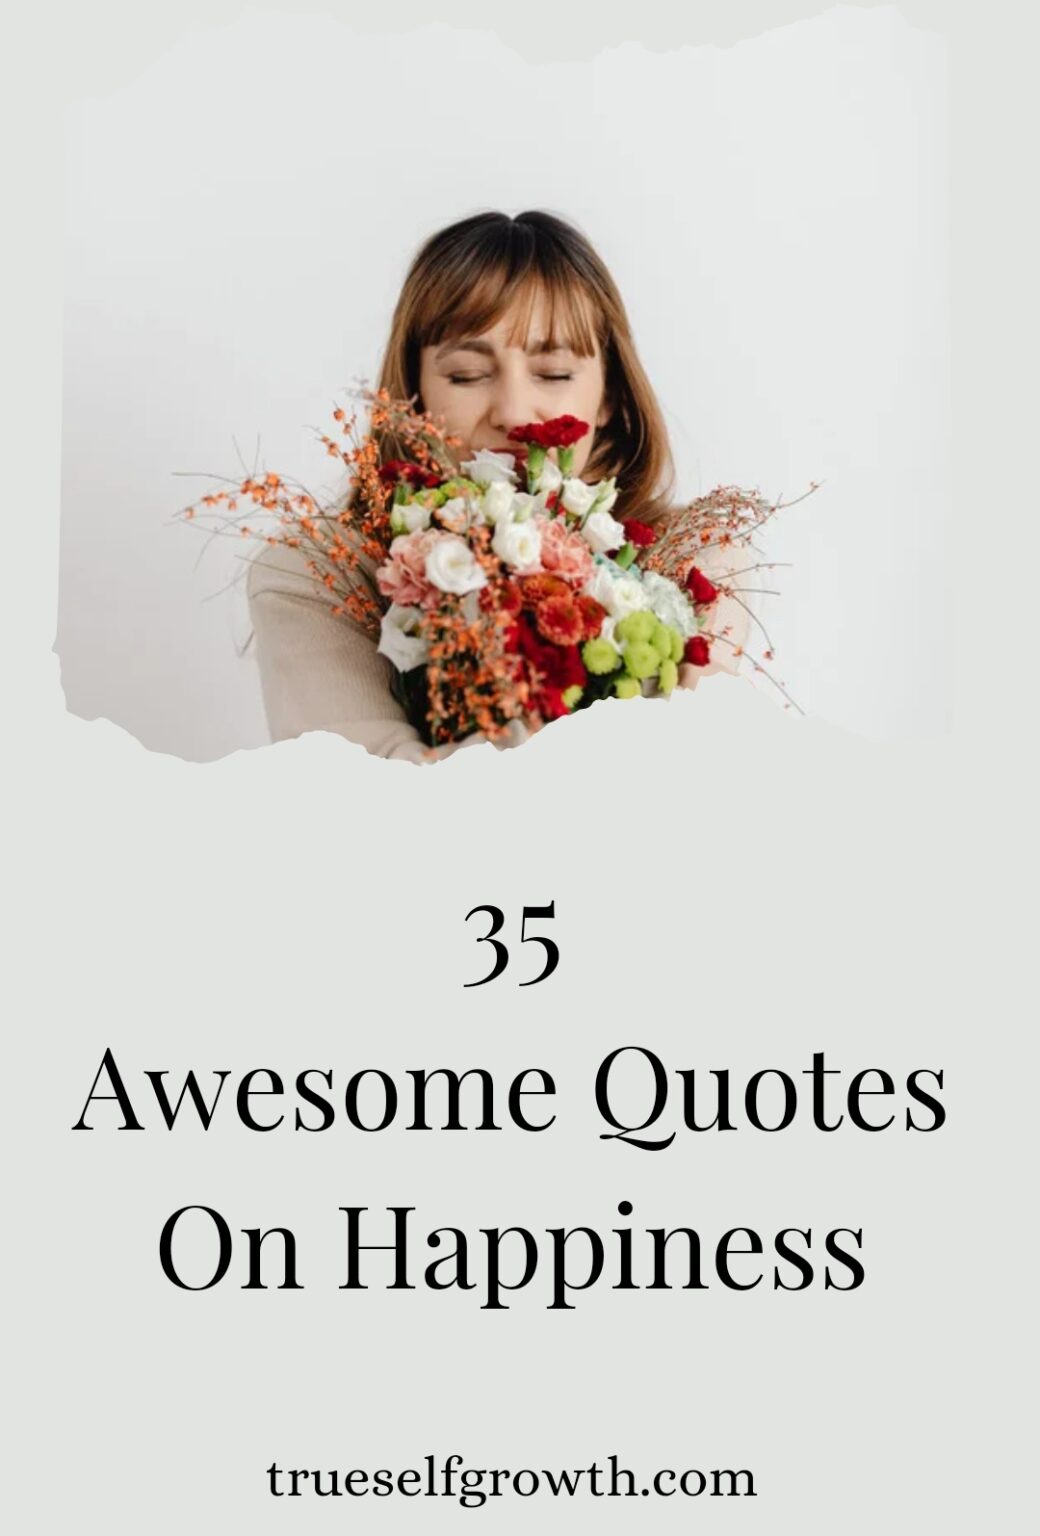 35 Awesome Quotes On Happiness - True Self Growth